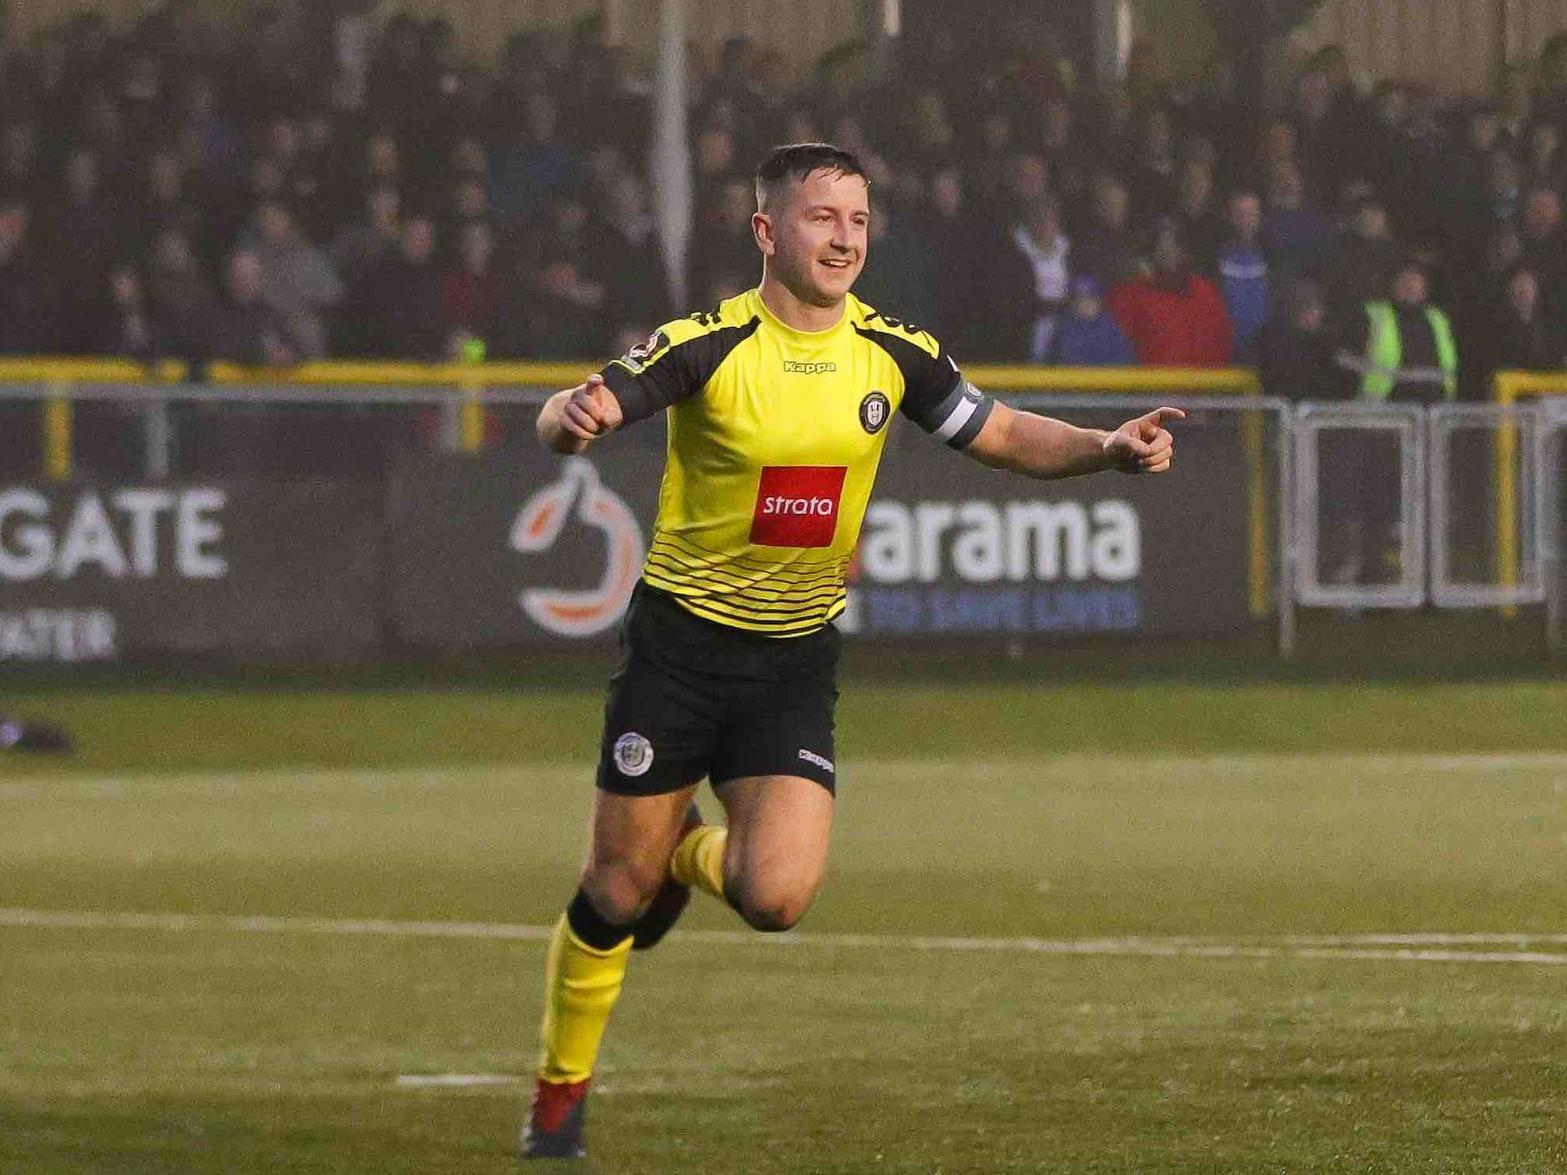 Josh Falkingham 8. His first goal in more than a year was an important one as it was just starting to look as if it might be 'one of those days' in front of goal for Town.